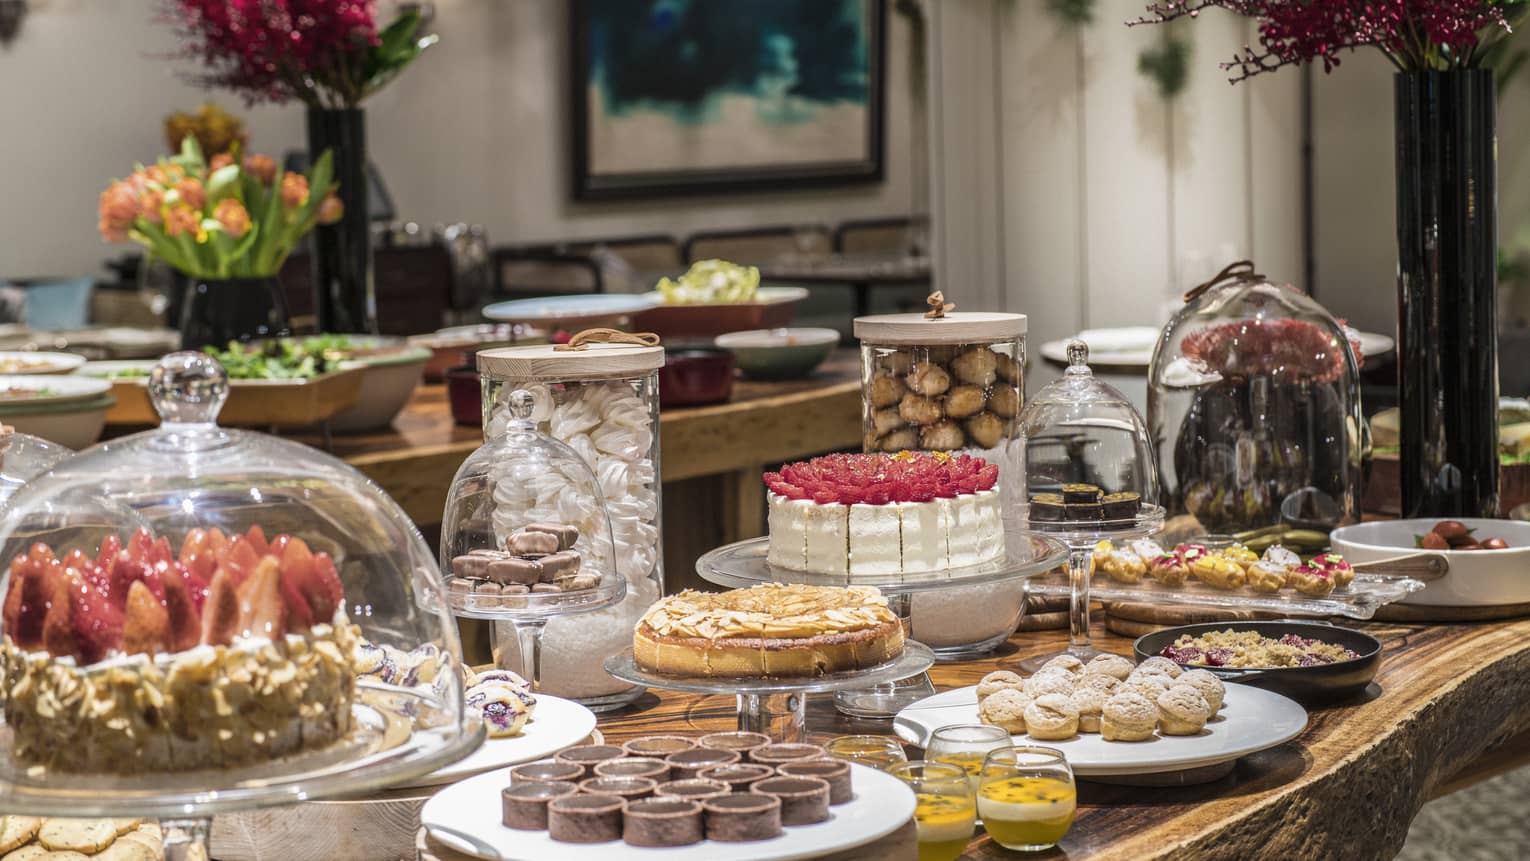 An arrangement of a variety of decadent desserts including cakes, tarts and soufflés 